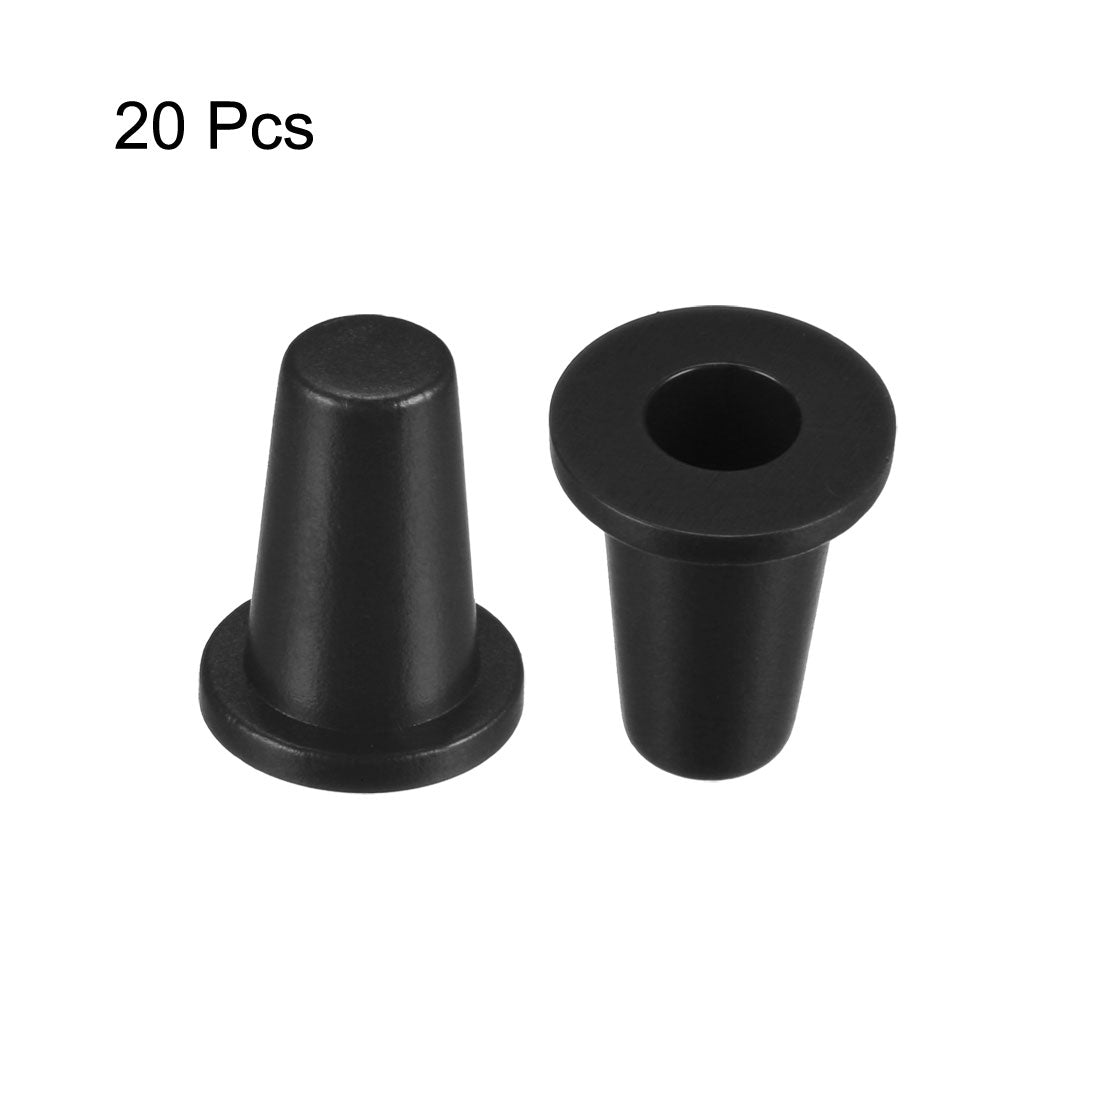 uxcell Uxcell 20Pcs 3.5mm Hole Dia Plastic Push Button Tactile Switch Caps Cover Keycaps Protector Black for 6x6 Micro Switch